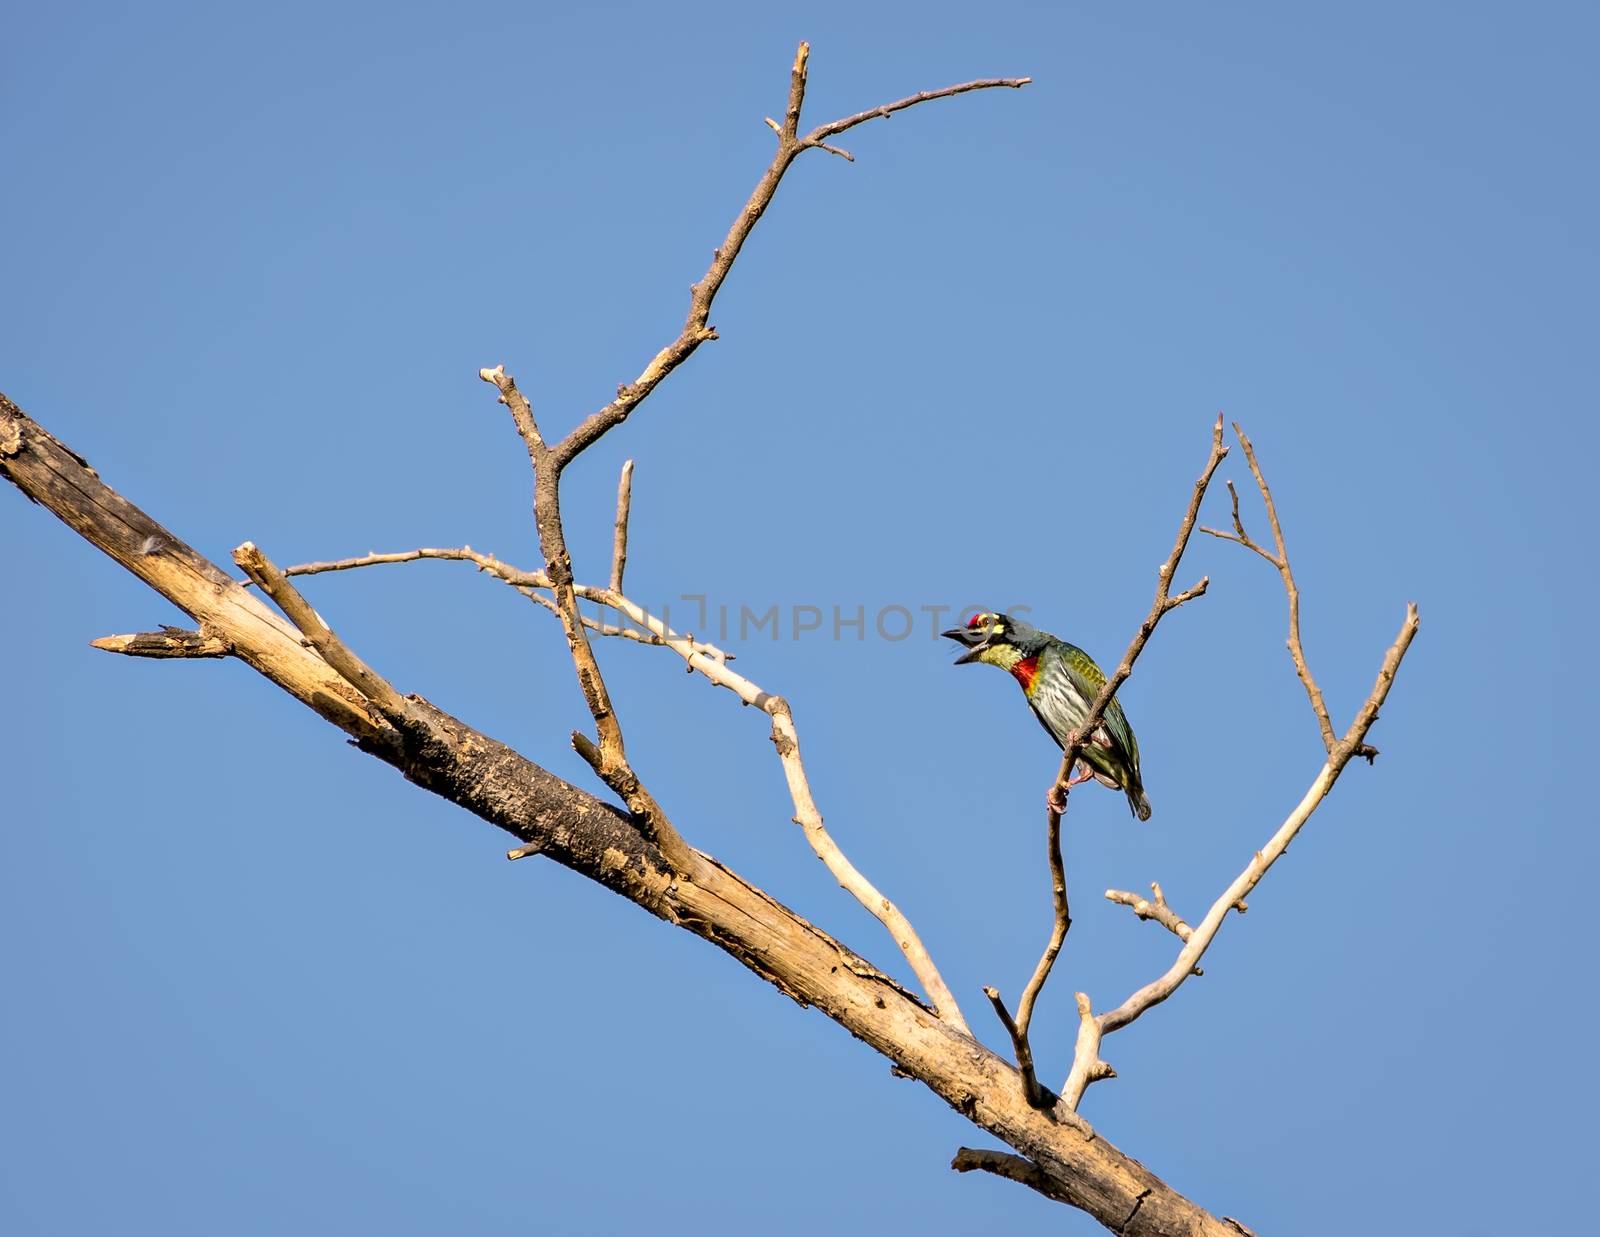 Isolated image of shouting copper smith barbet bird, sitting on dry tree branch. by lalam